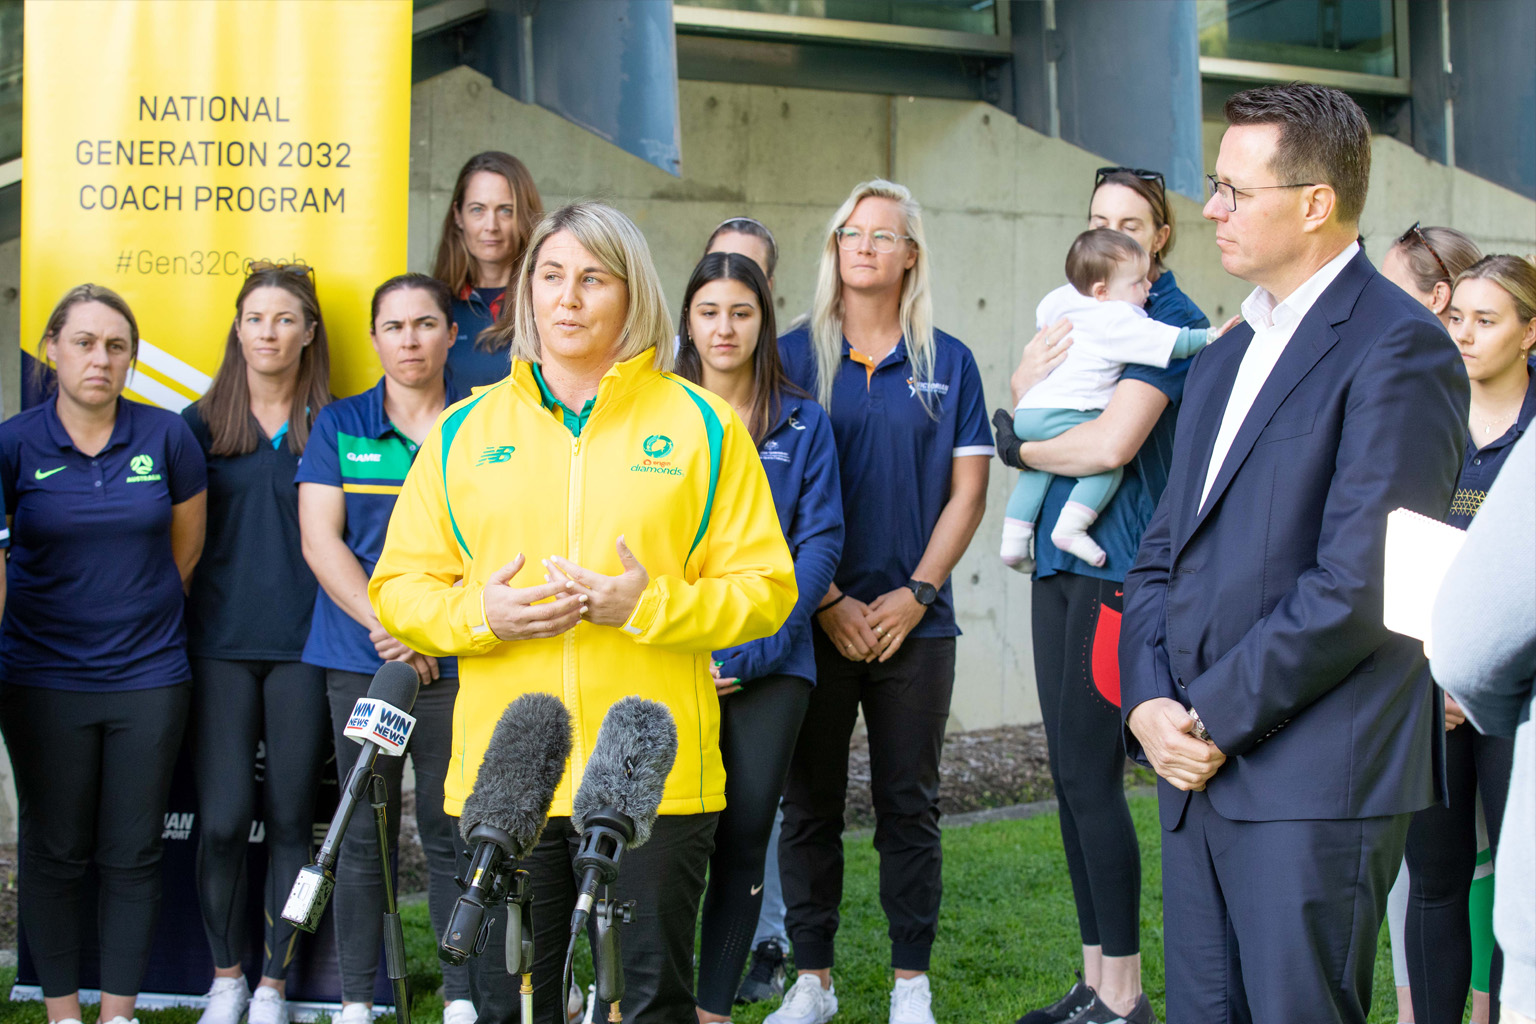 Woman in yellow Diamonds netball jacket speaks into microphones with a group of women coaches in the background.